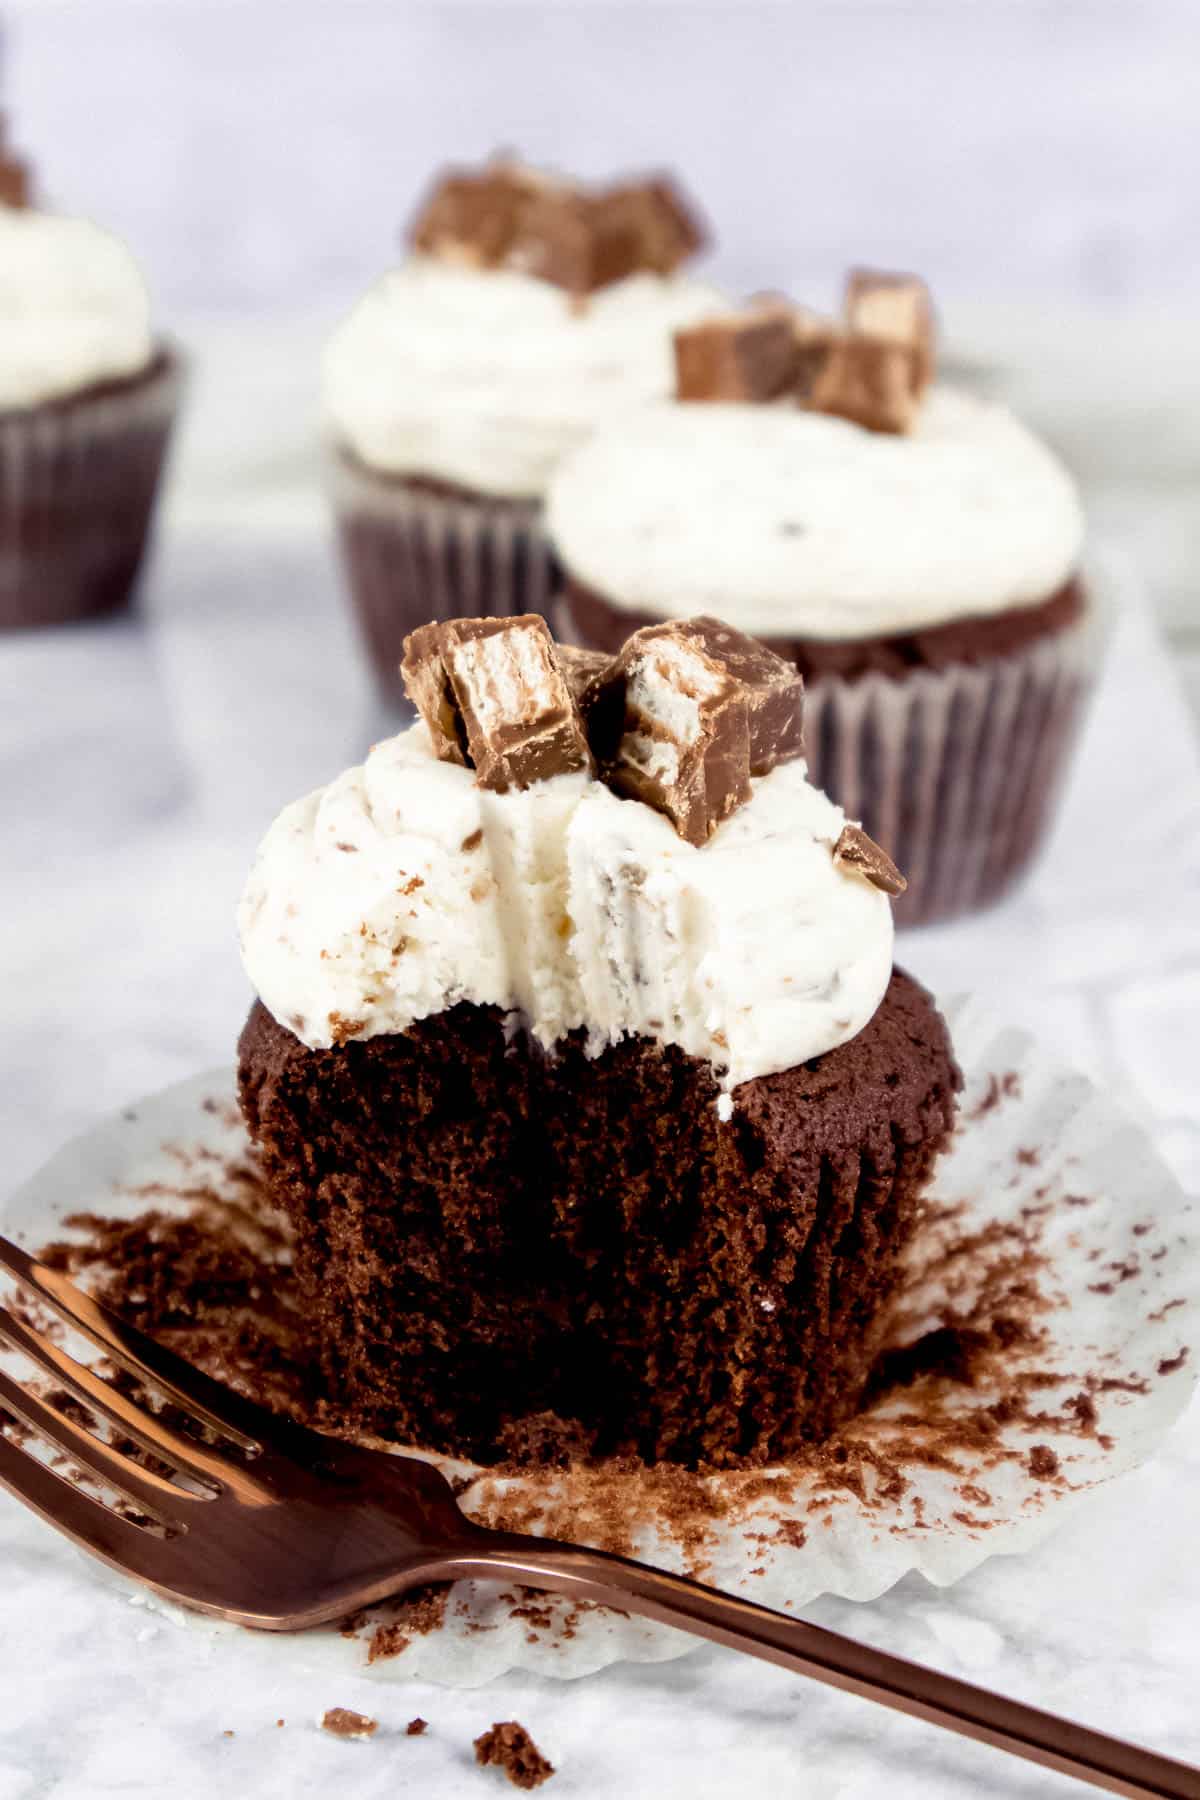 Chocolate cupcake with wafer biscuit on top